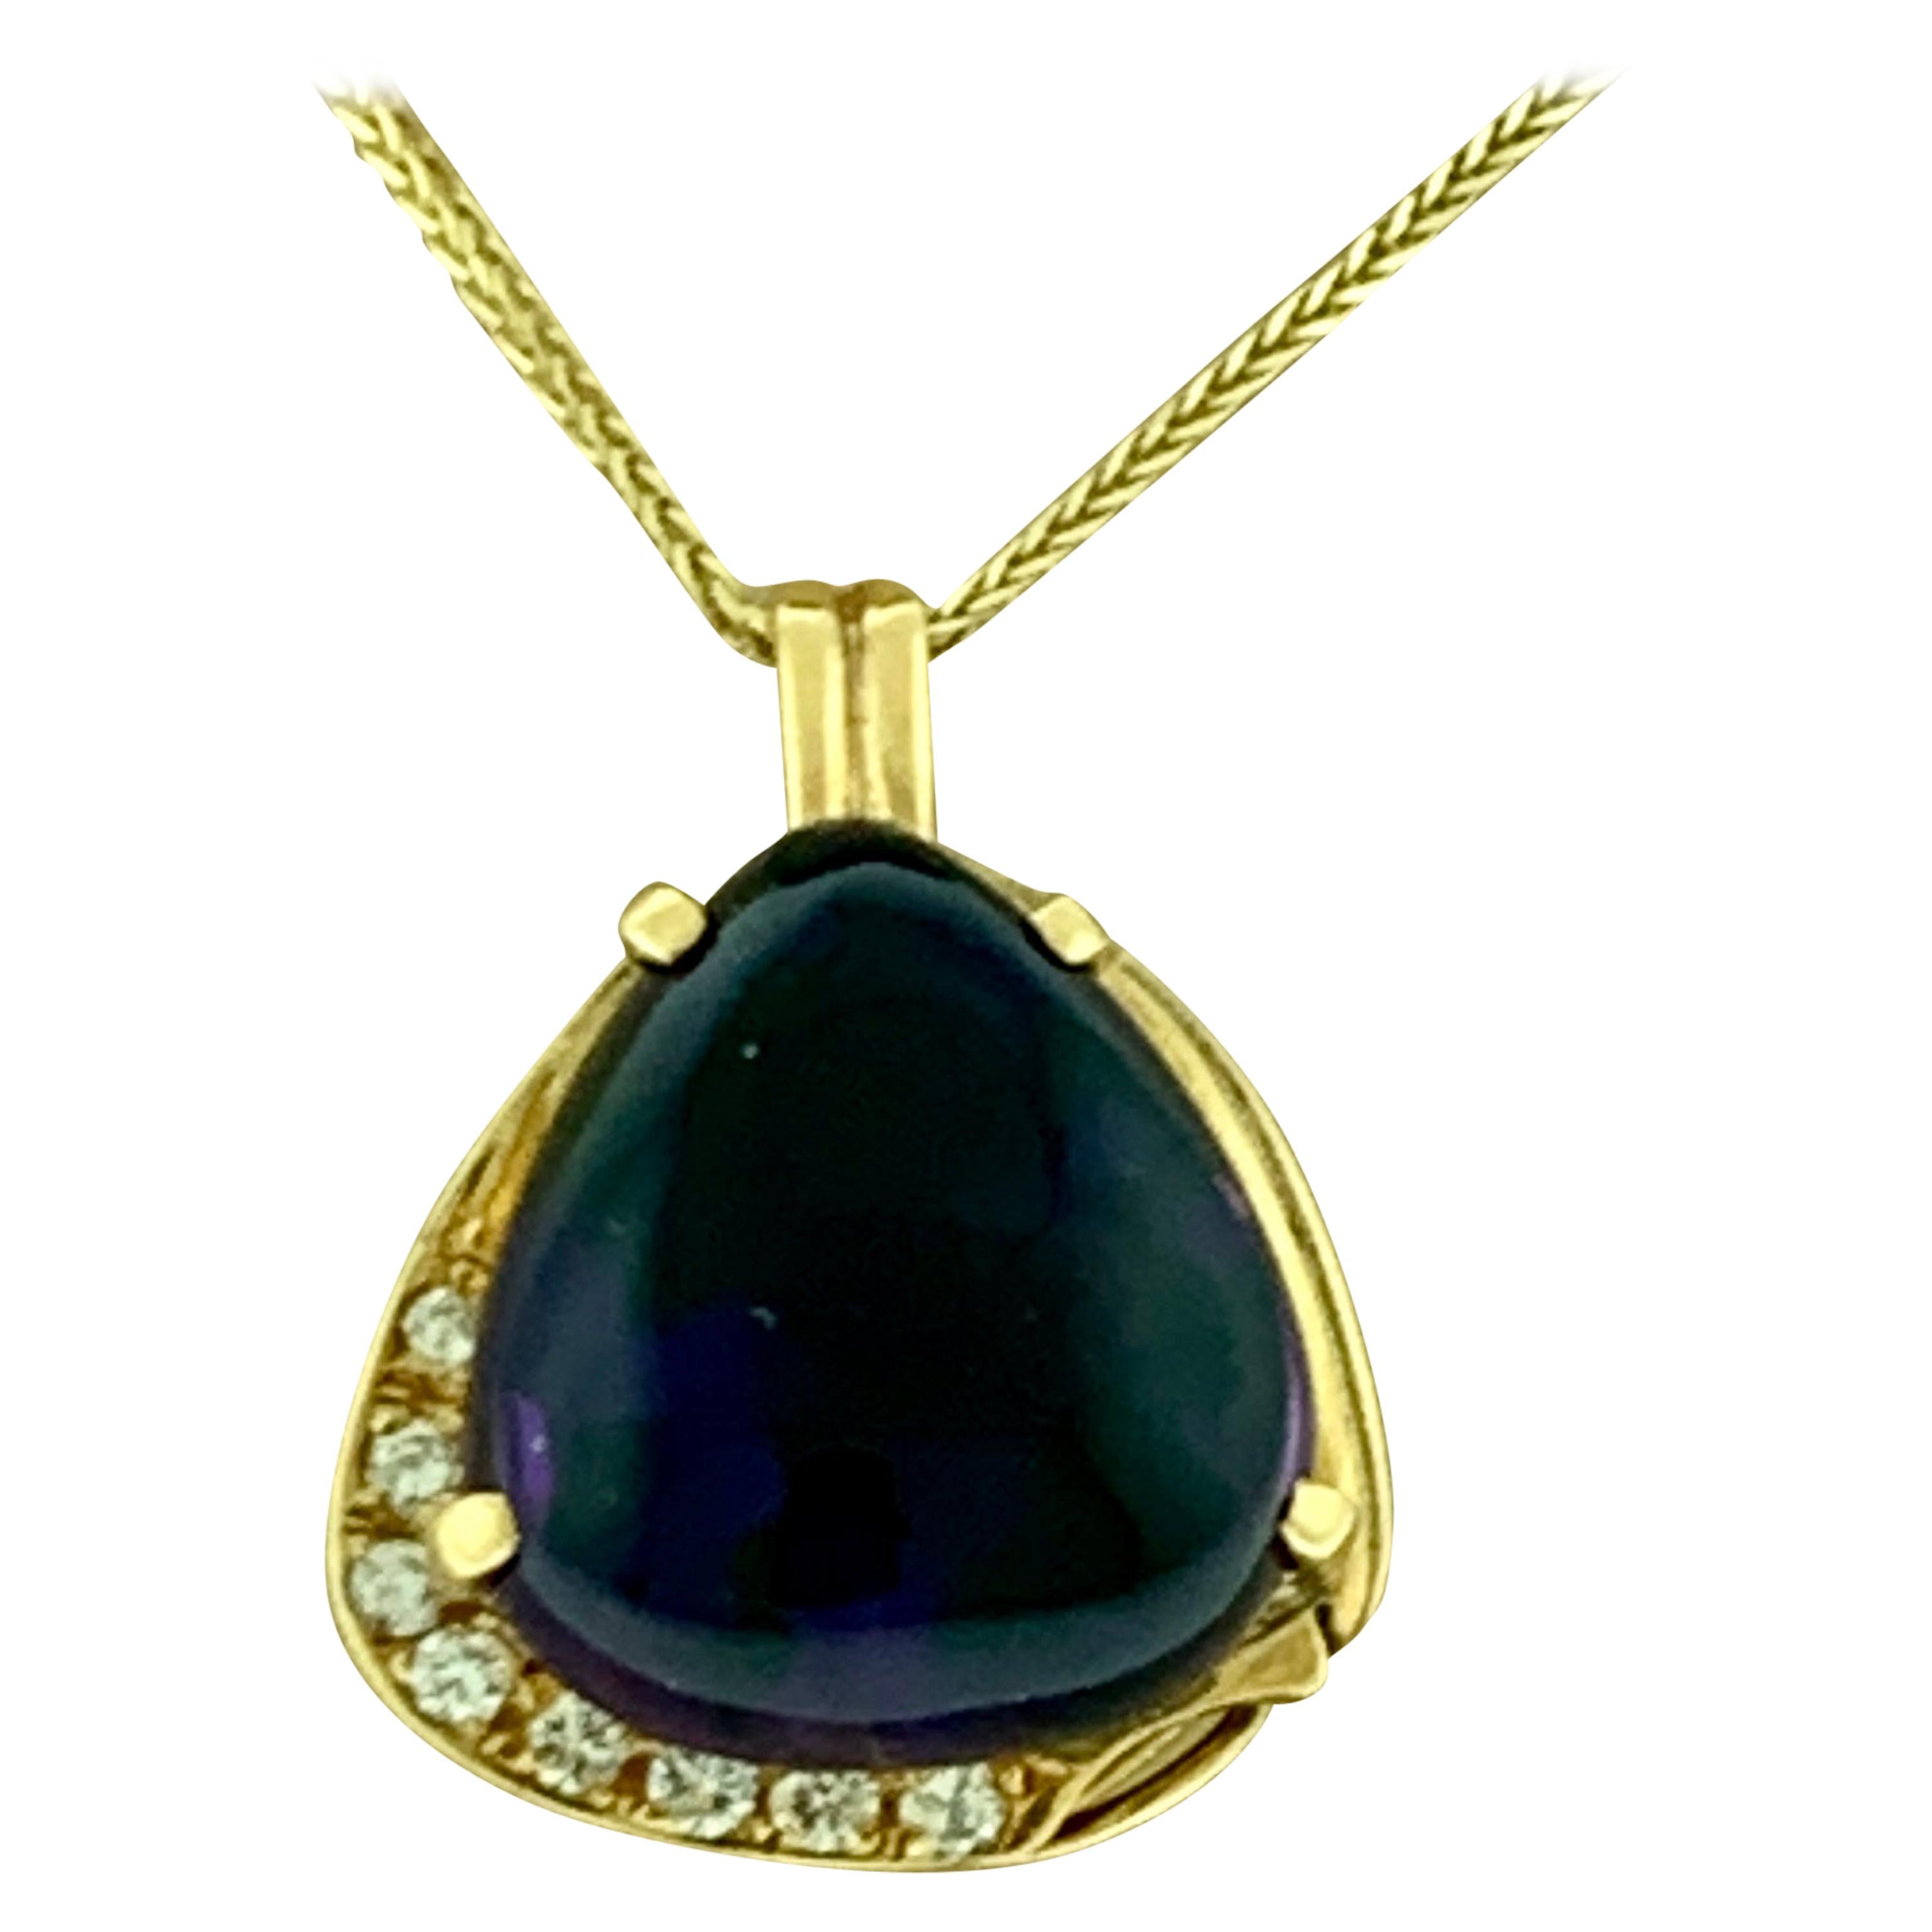 Approximately 10 Carat  Tear Drop Amethyst & Diamonds Pendent 18 K yellow Gold
Amethyst is 17 mm X 15mm approximately 10 ct
16 inch 14 K gold Chain is 1.5 grams
Weight of 18 Karat gold pendent is 6.6 Grams
This extraordinary Necklace is 10 carats